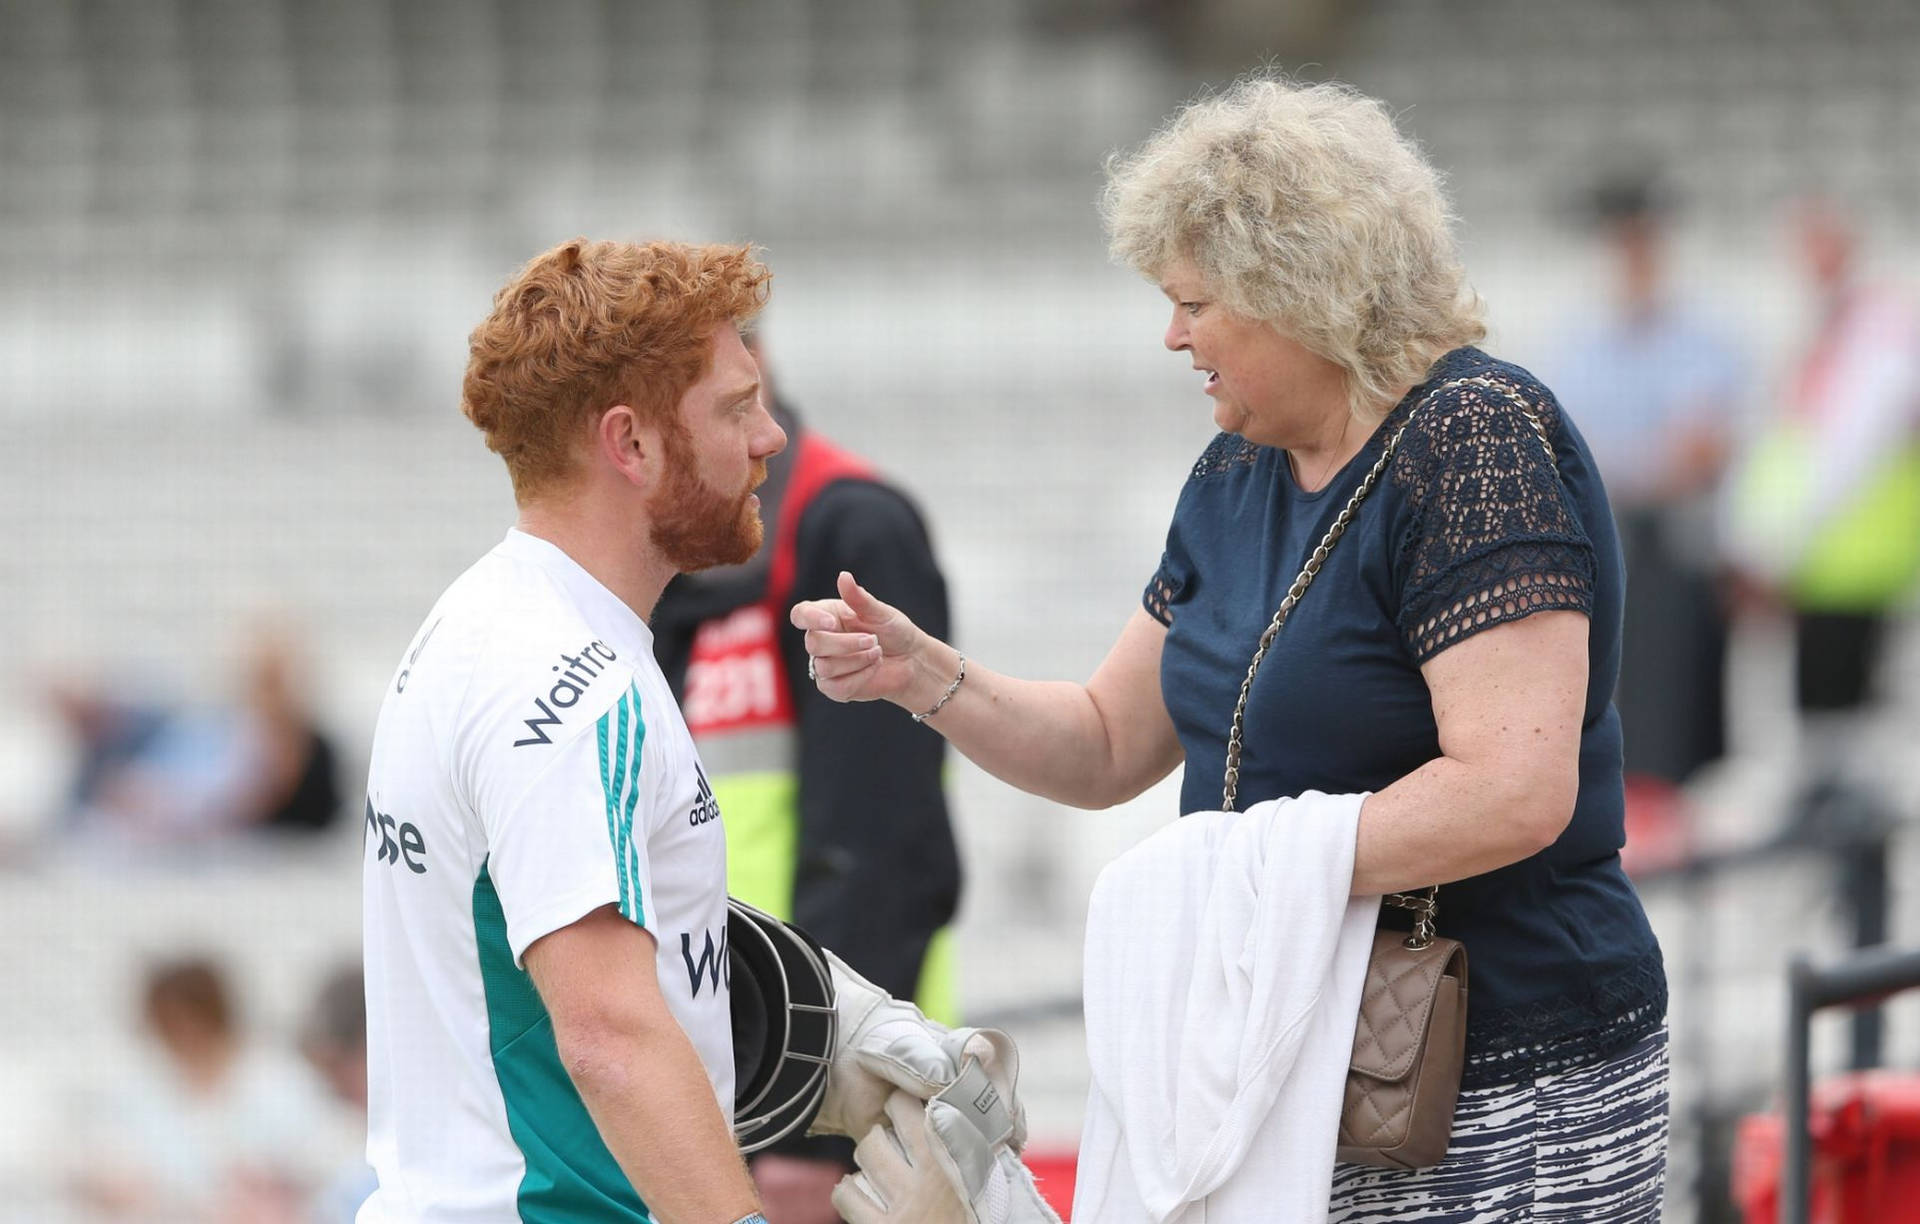 Cricketer Jonny Bairstow Sharing A Sweet Moment With His Mother